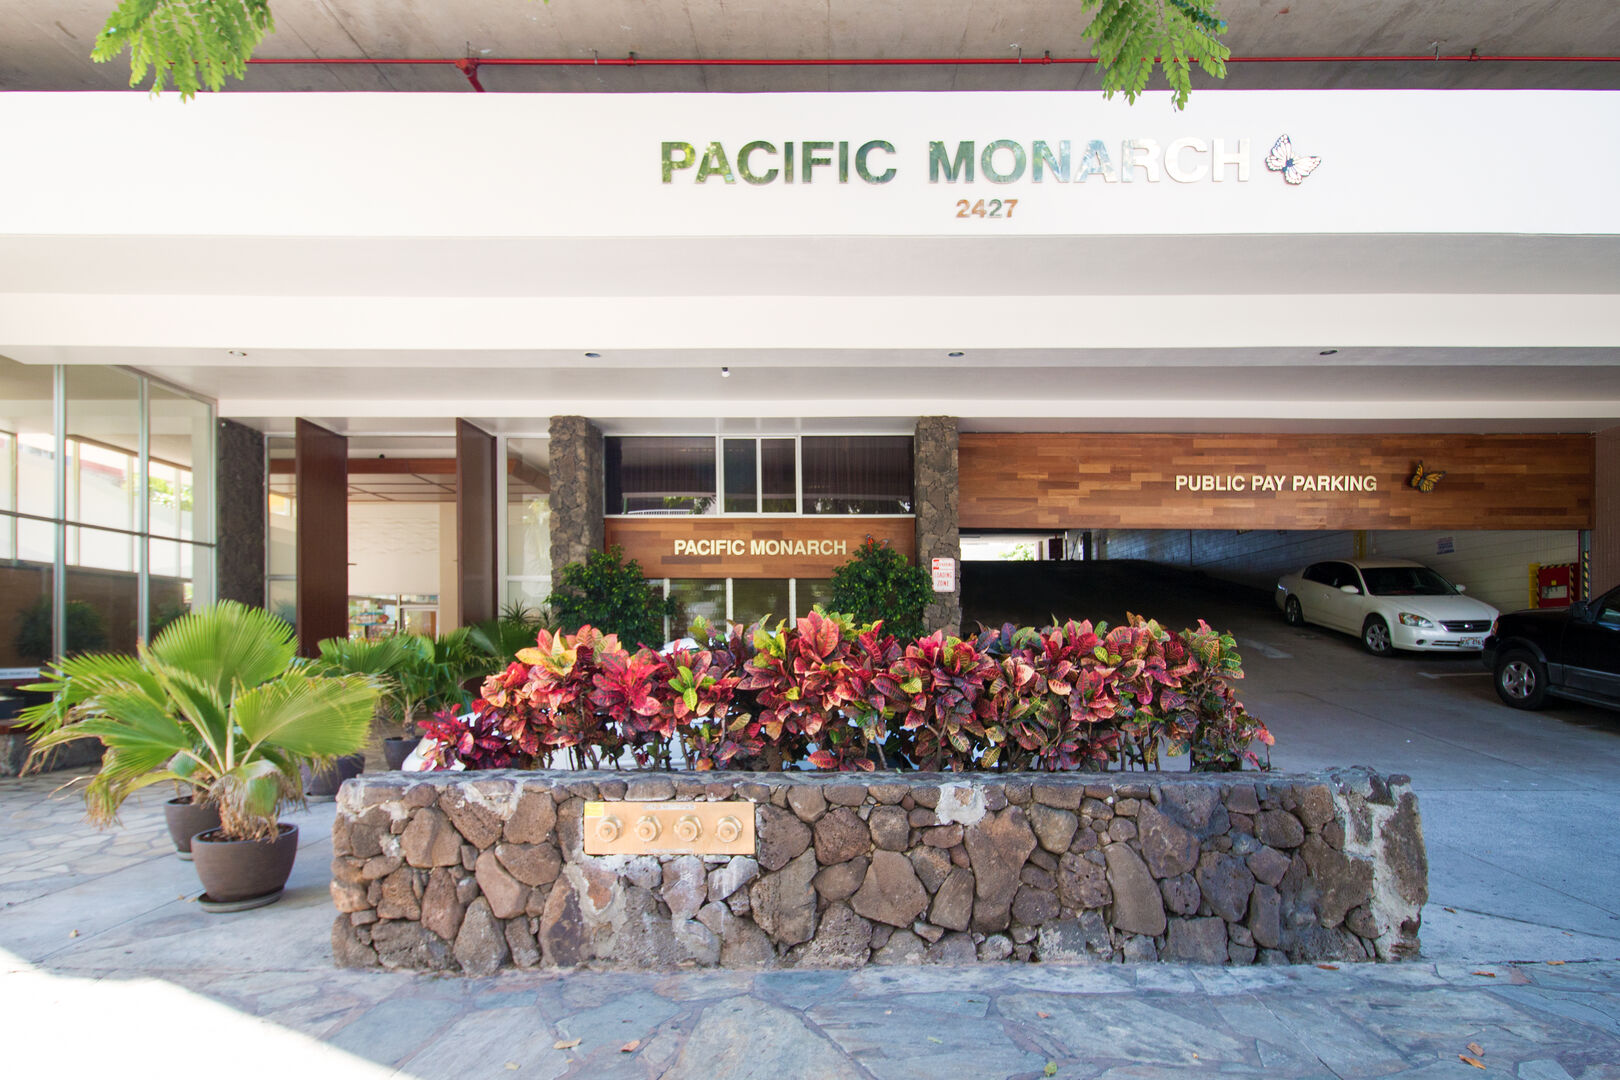 Pacific Monarch entrance on the left, paid public parking entrance on the right side